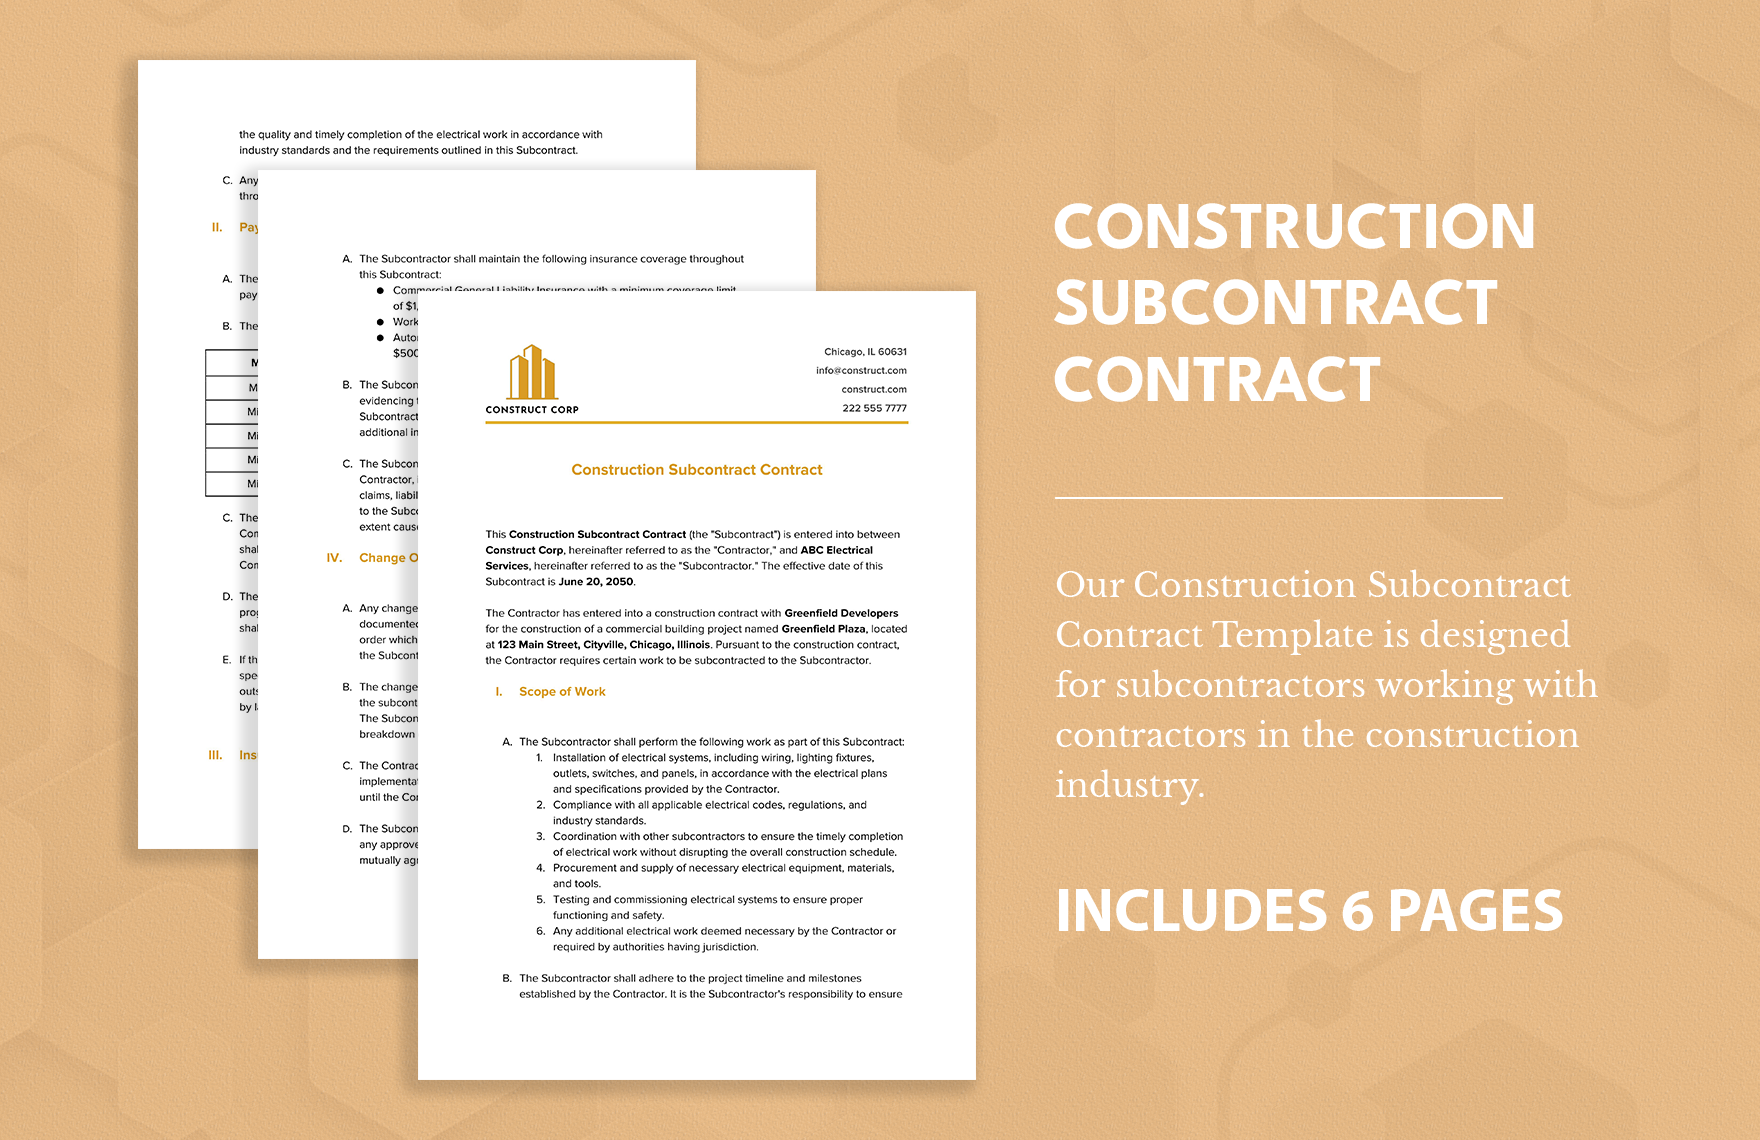 Construction Subcontract Contract